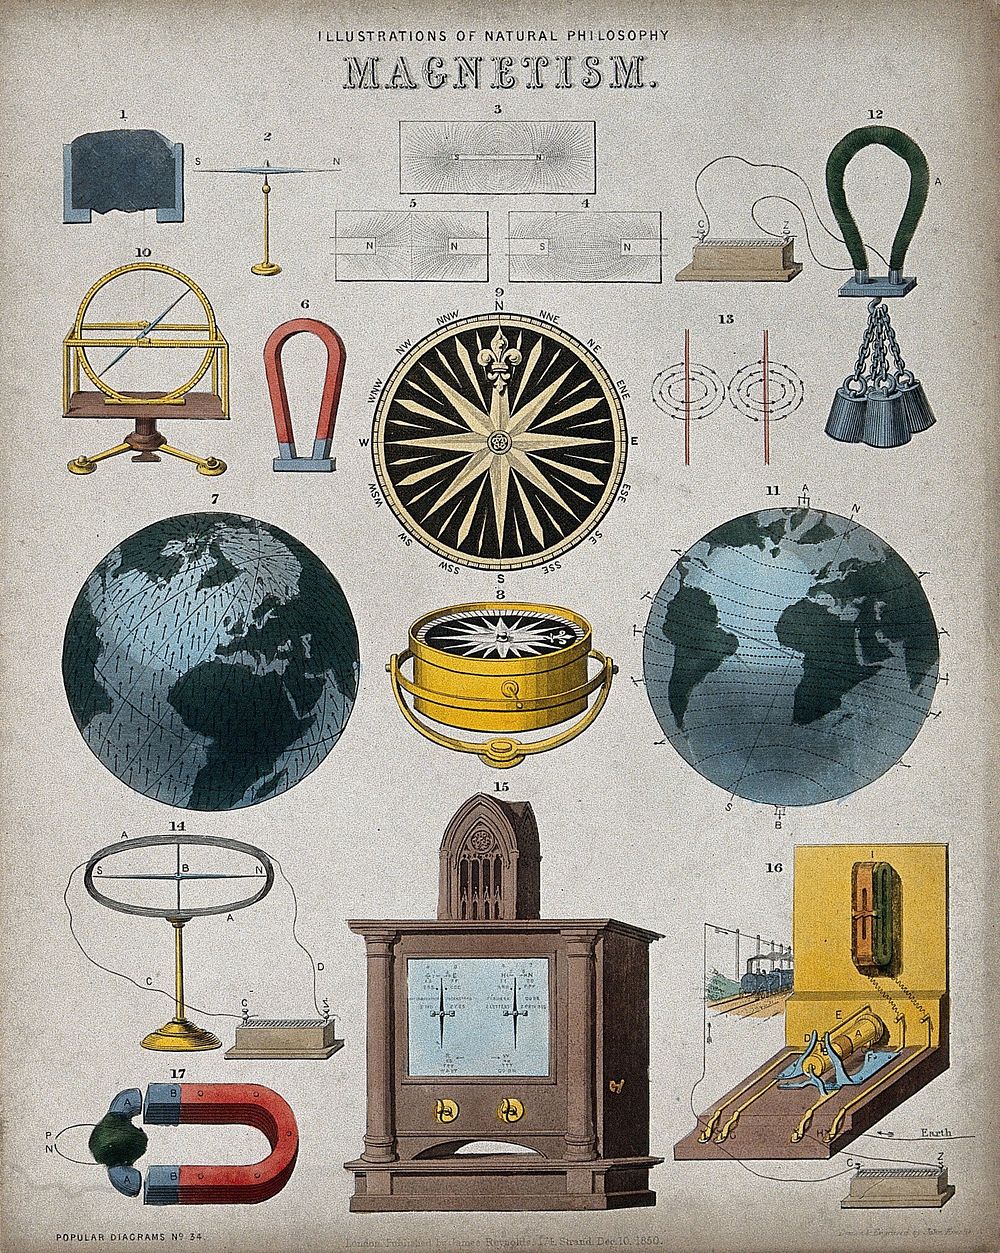 Magnetism: electrical equipment and magnetic phenomena. Coloured engraving by J. Emslie, 1850.